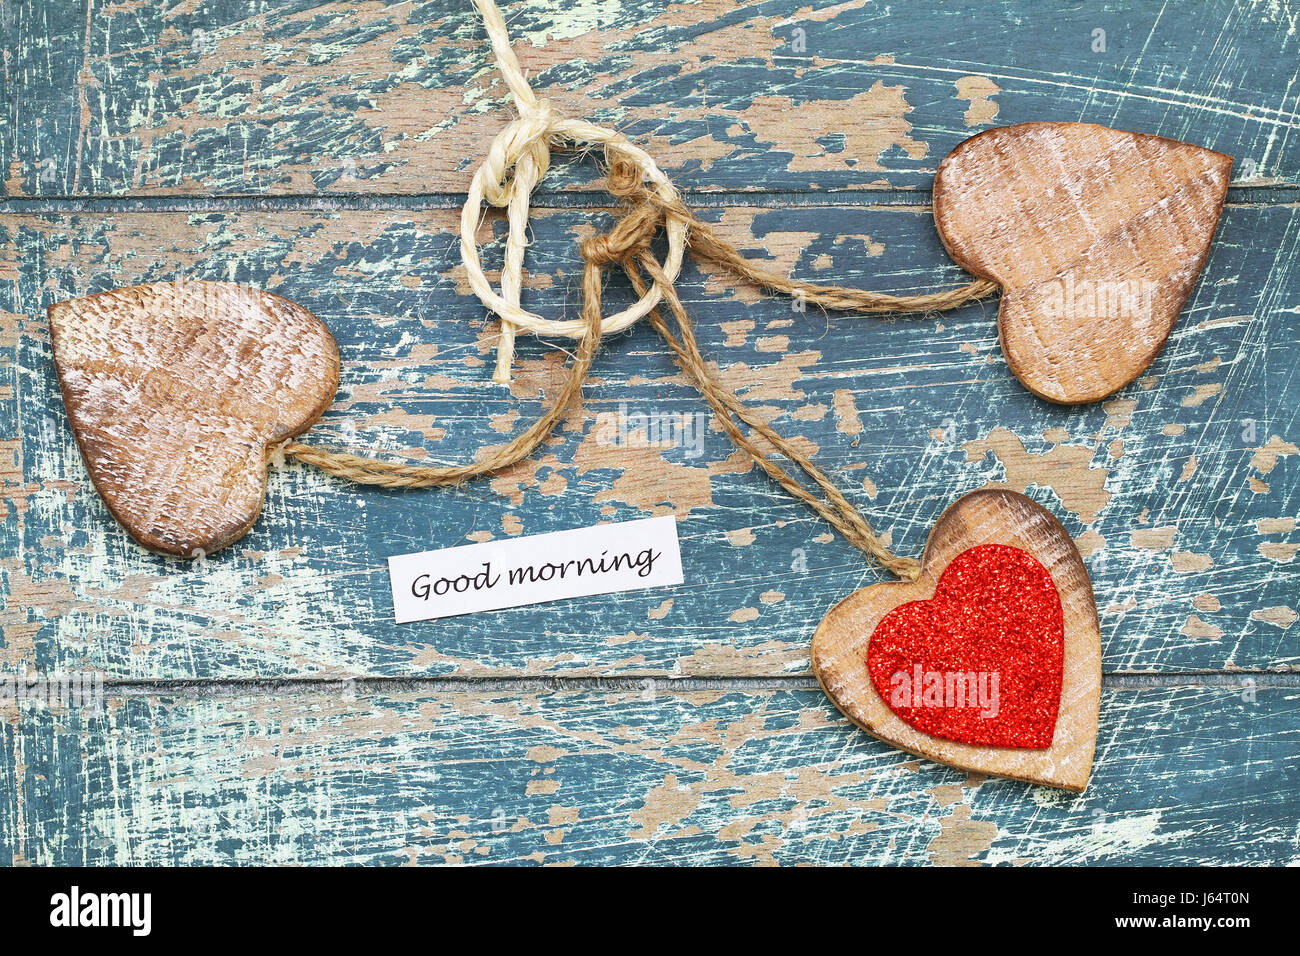 Good morning card with three wooden hearts on rustic wooden surface Stock Photo